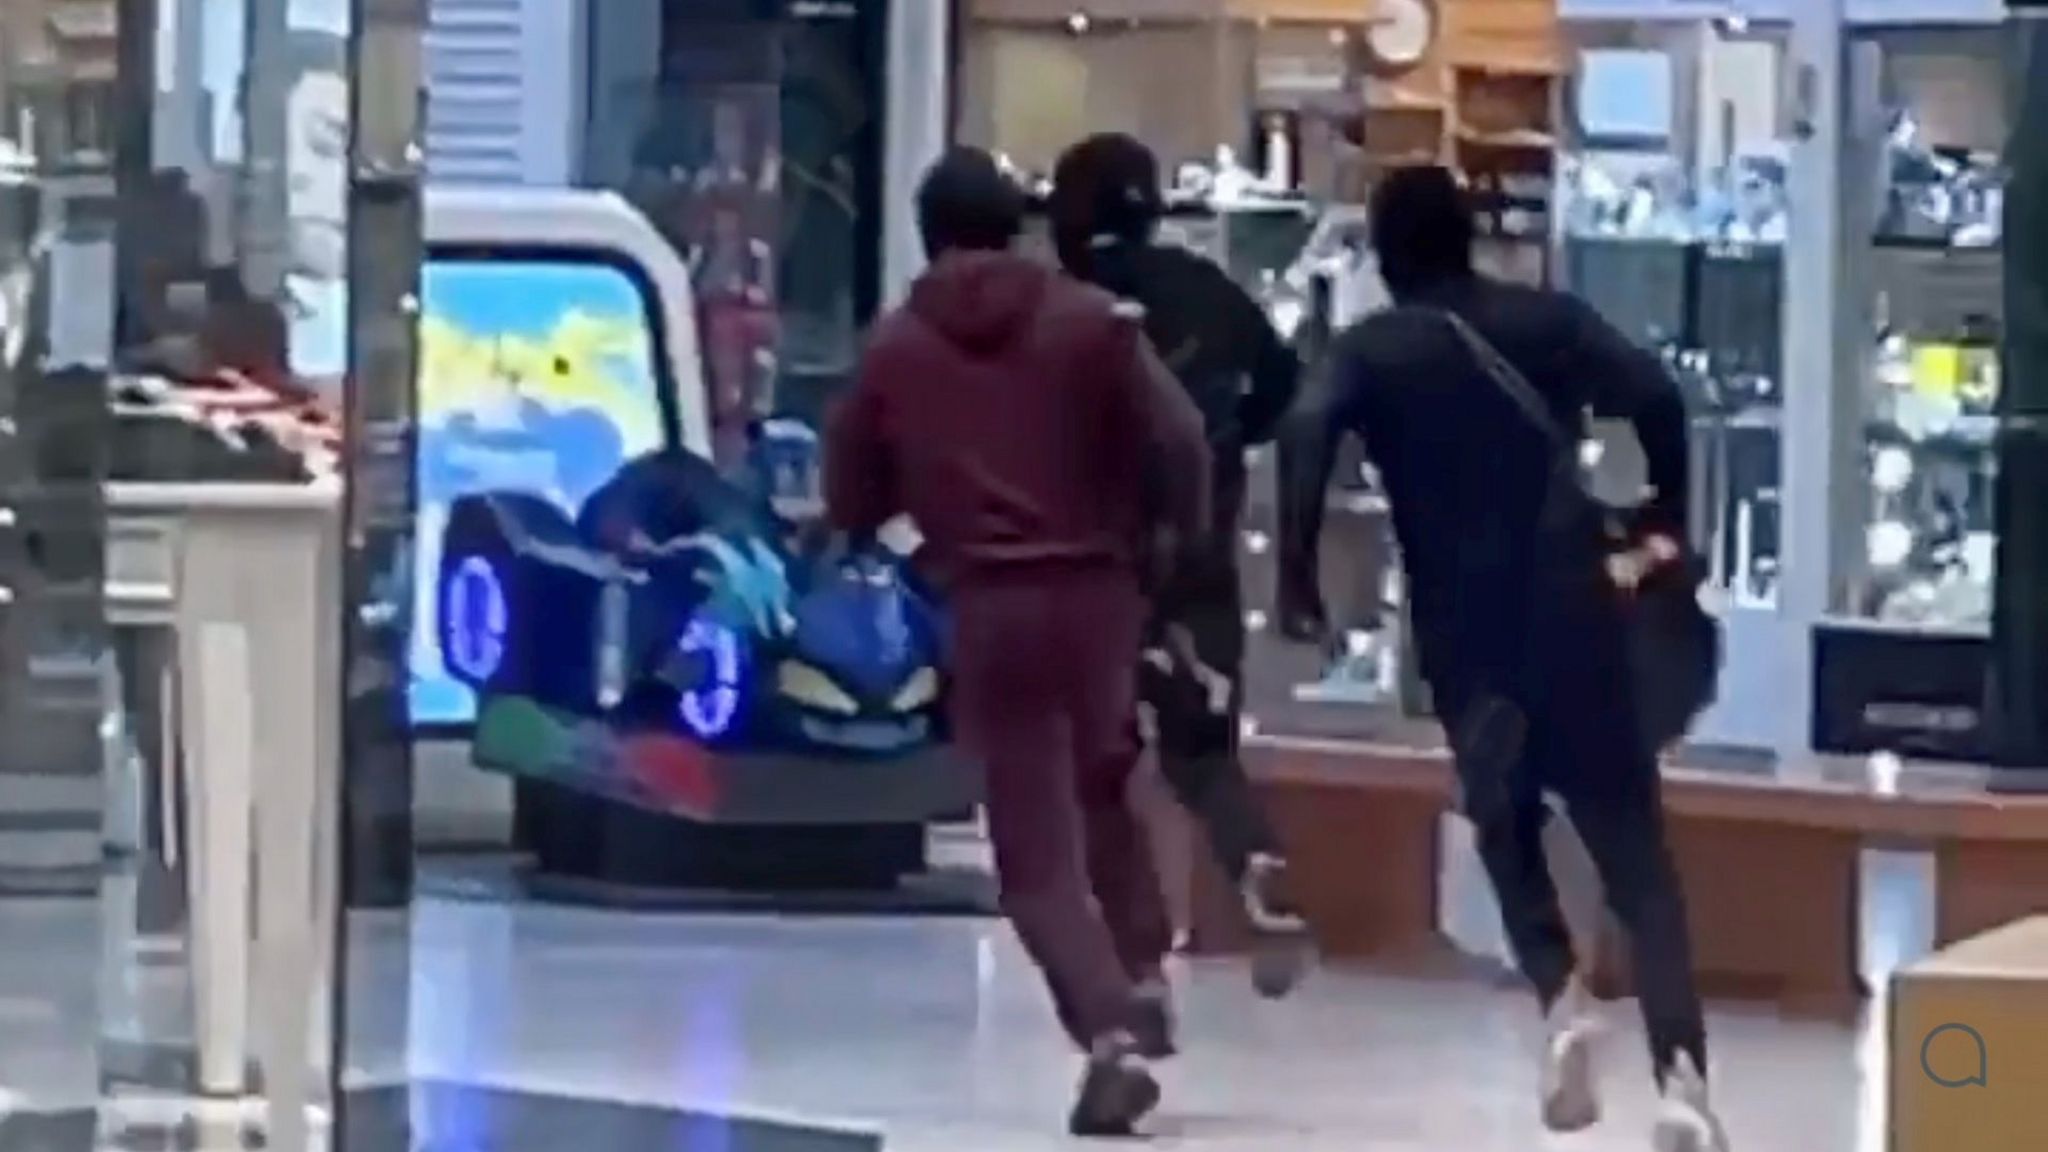 Gang members run out of shopping centre